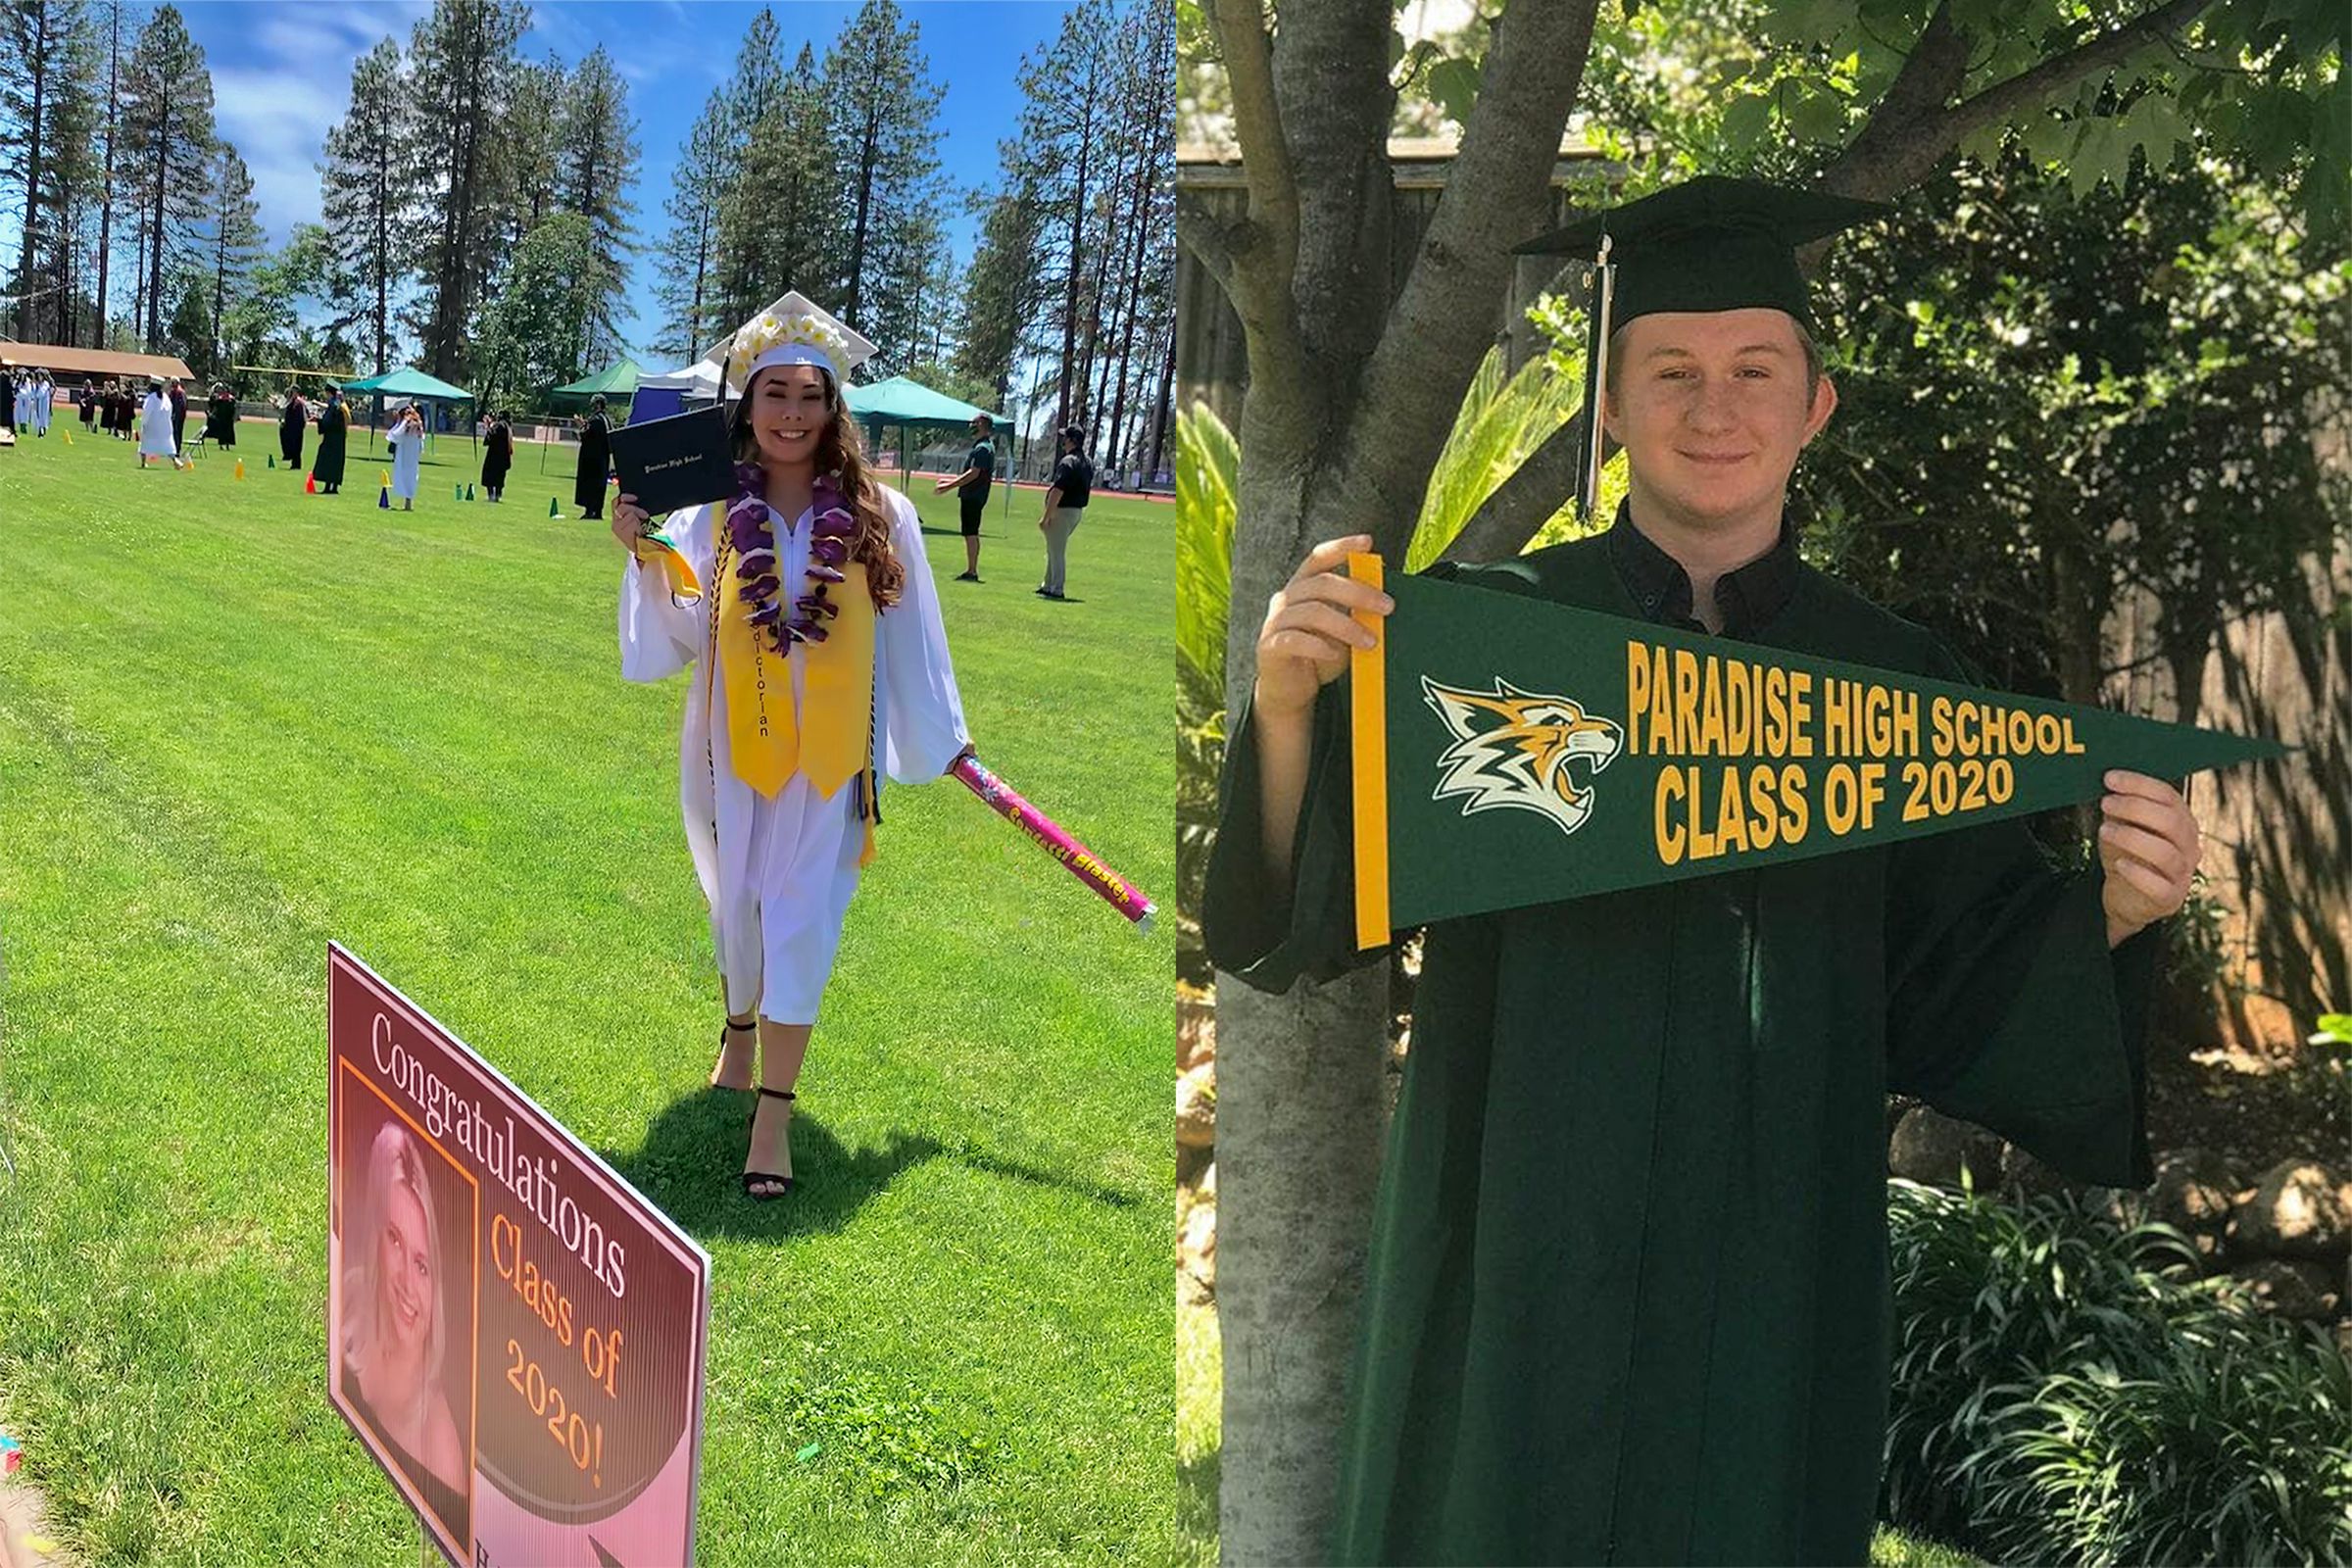 Katie-Lynn Chandler and Eric Helton graduated from Paradise High School on June 1st, 2020. Chandler will attend California State University, Chico in the fall. Helton will attend the University of California, Davis.